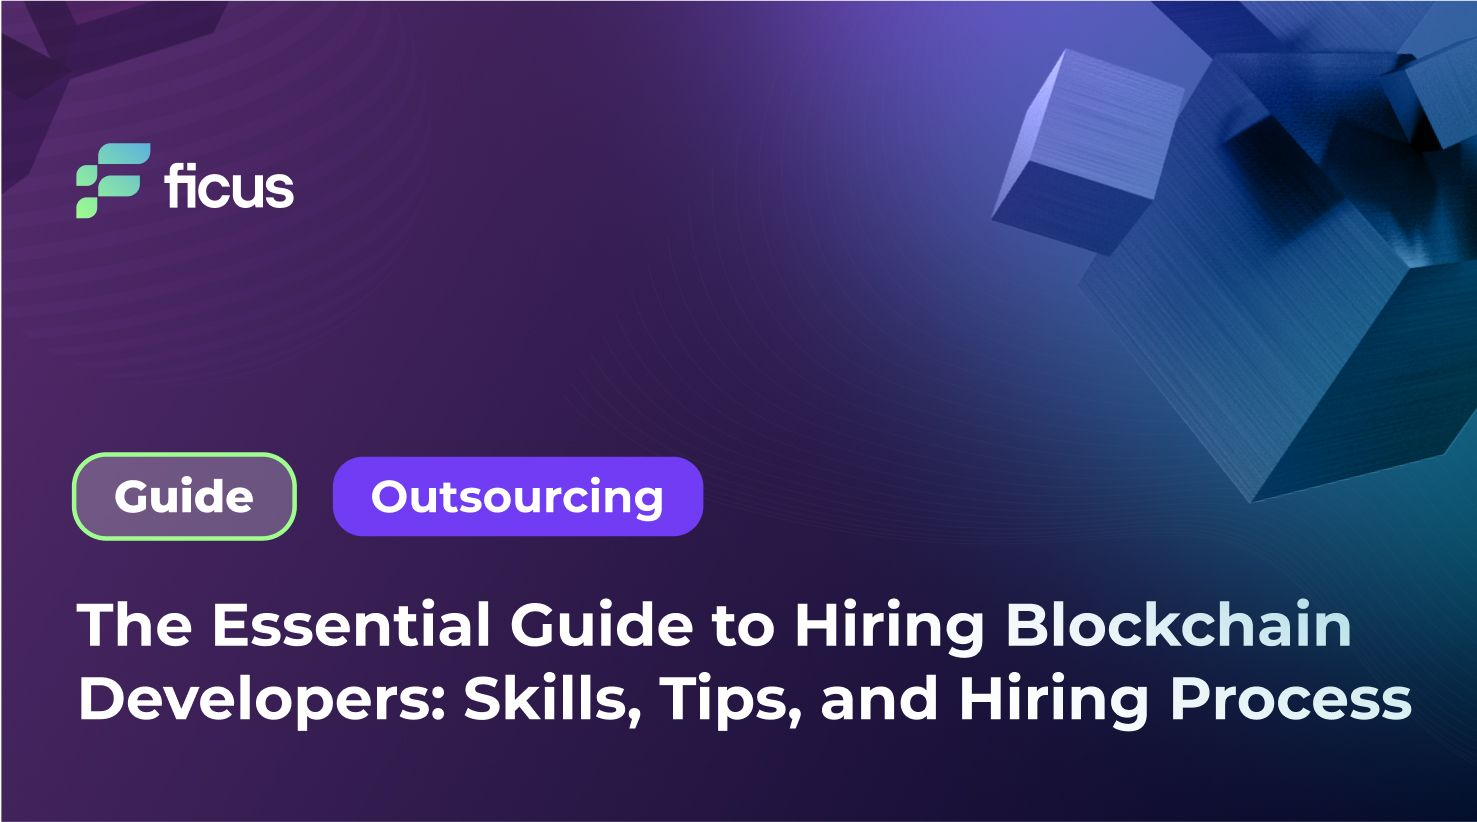 The Essential Guide to Hiring Blockchain Developers: Skills, Tips, and Hiring Process